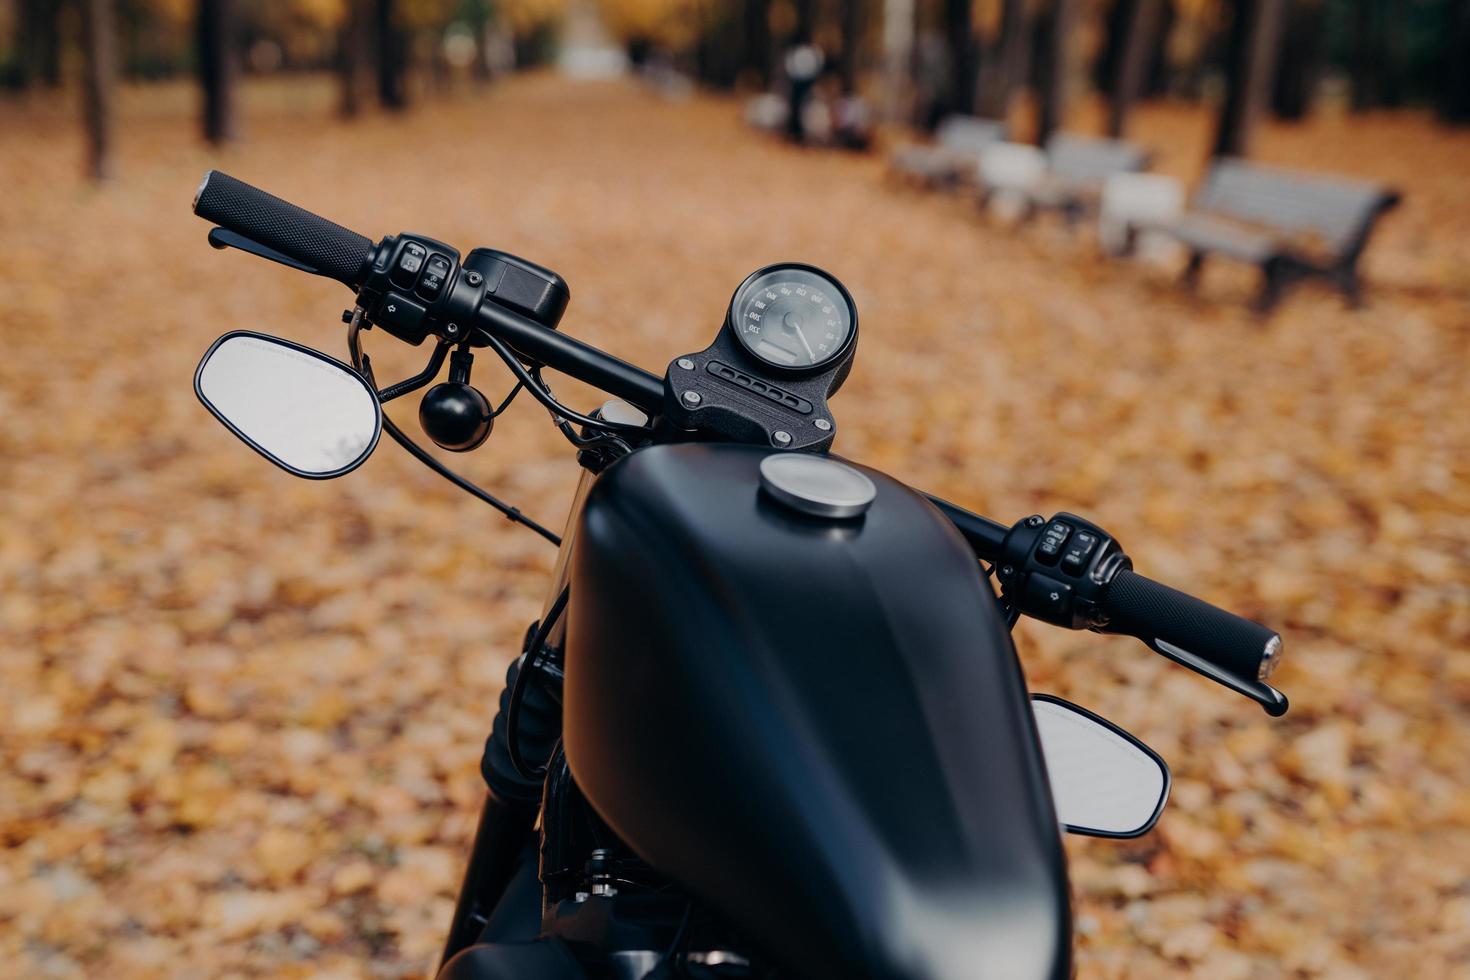 Close up shot of black motorcycle with speedometer, handlebar stands in autumn park against orange fallen leaves and benches. Transport concept. Bike parked outdoor photo